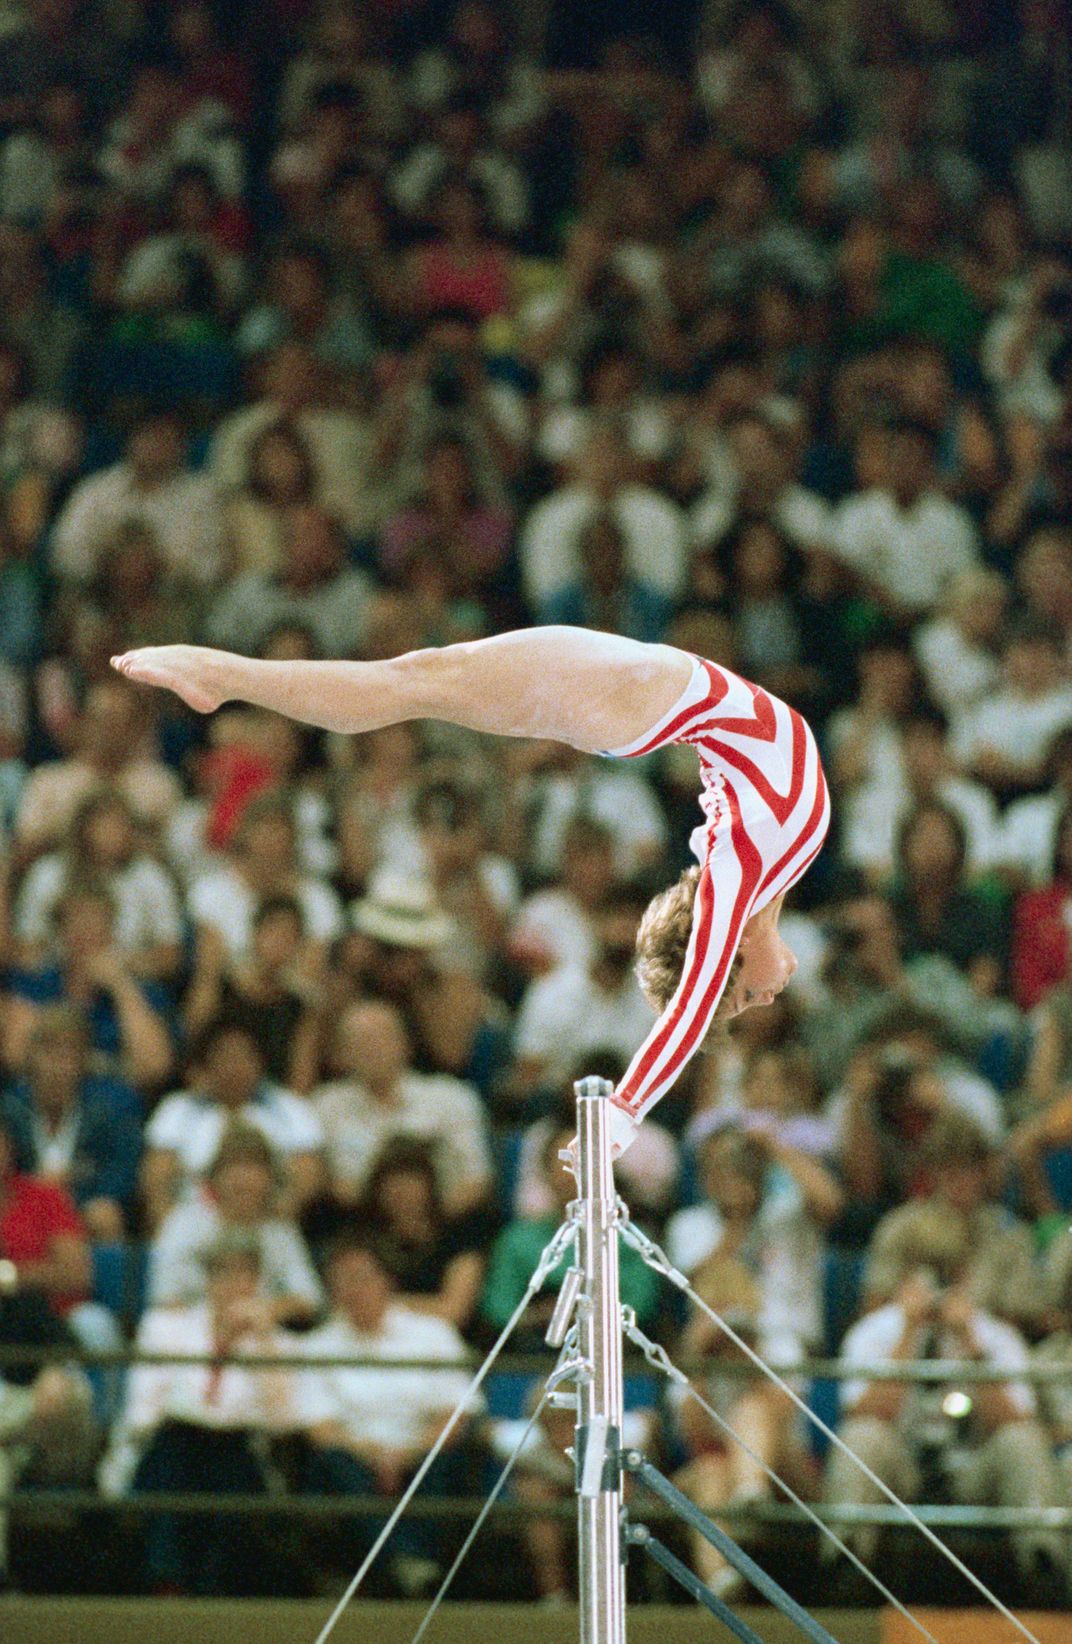 Mary Lou Retton performing on the uneven bars in Los Angeles